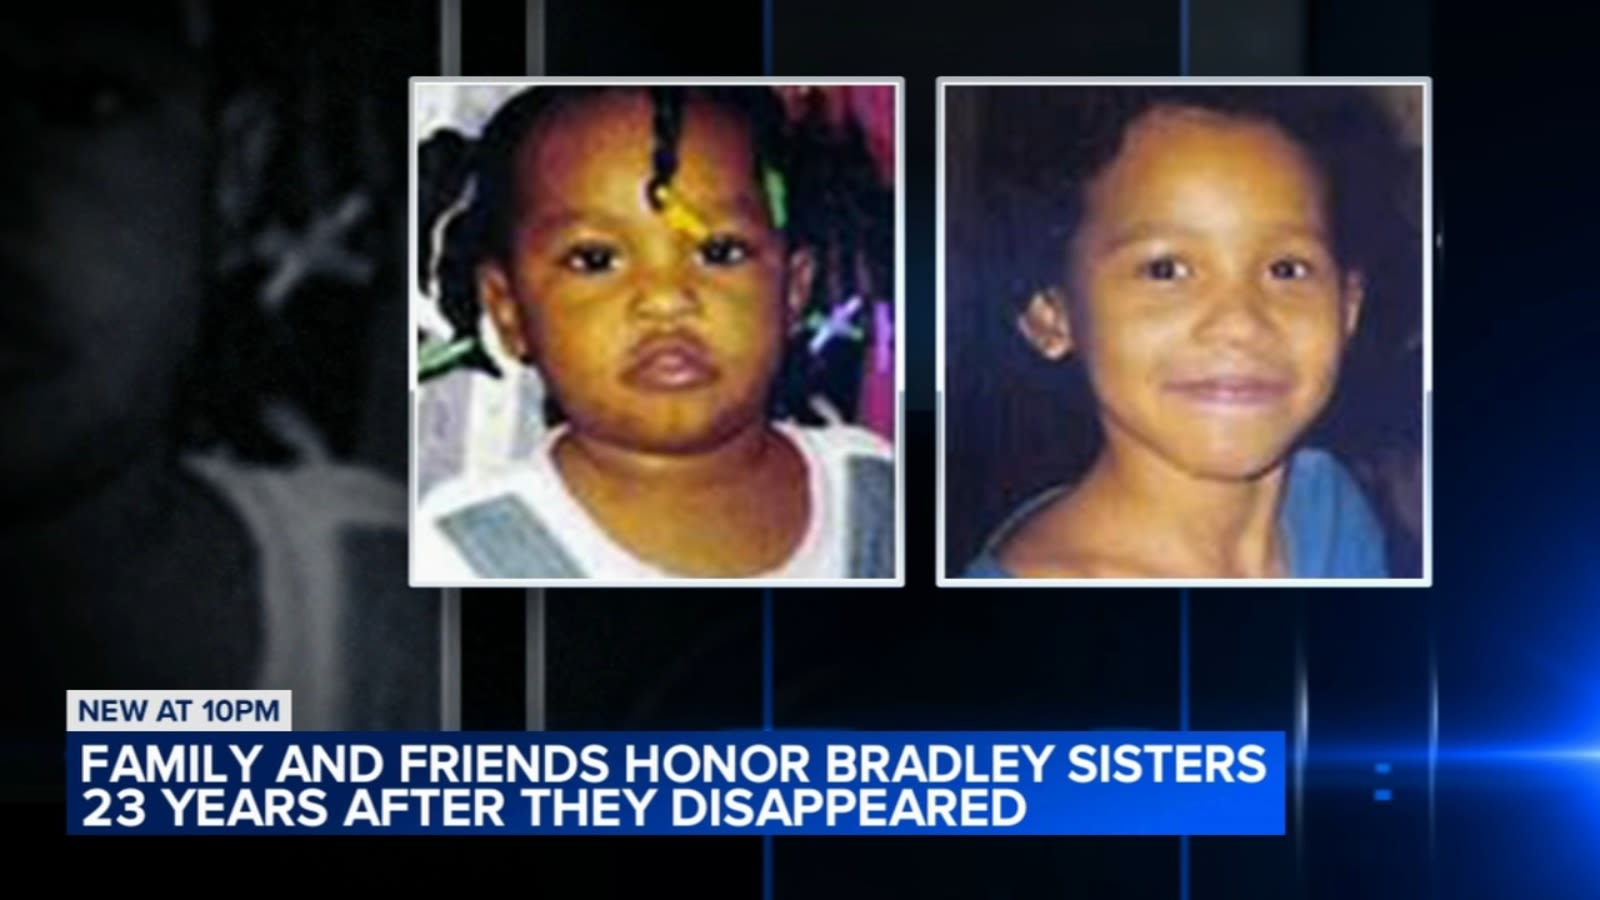 Bradley sisters disappeared from Bronzeville home 23 years ago